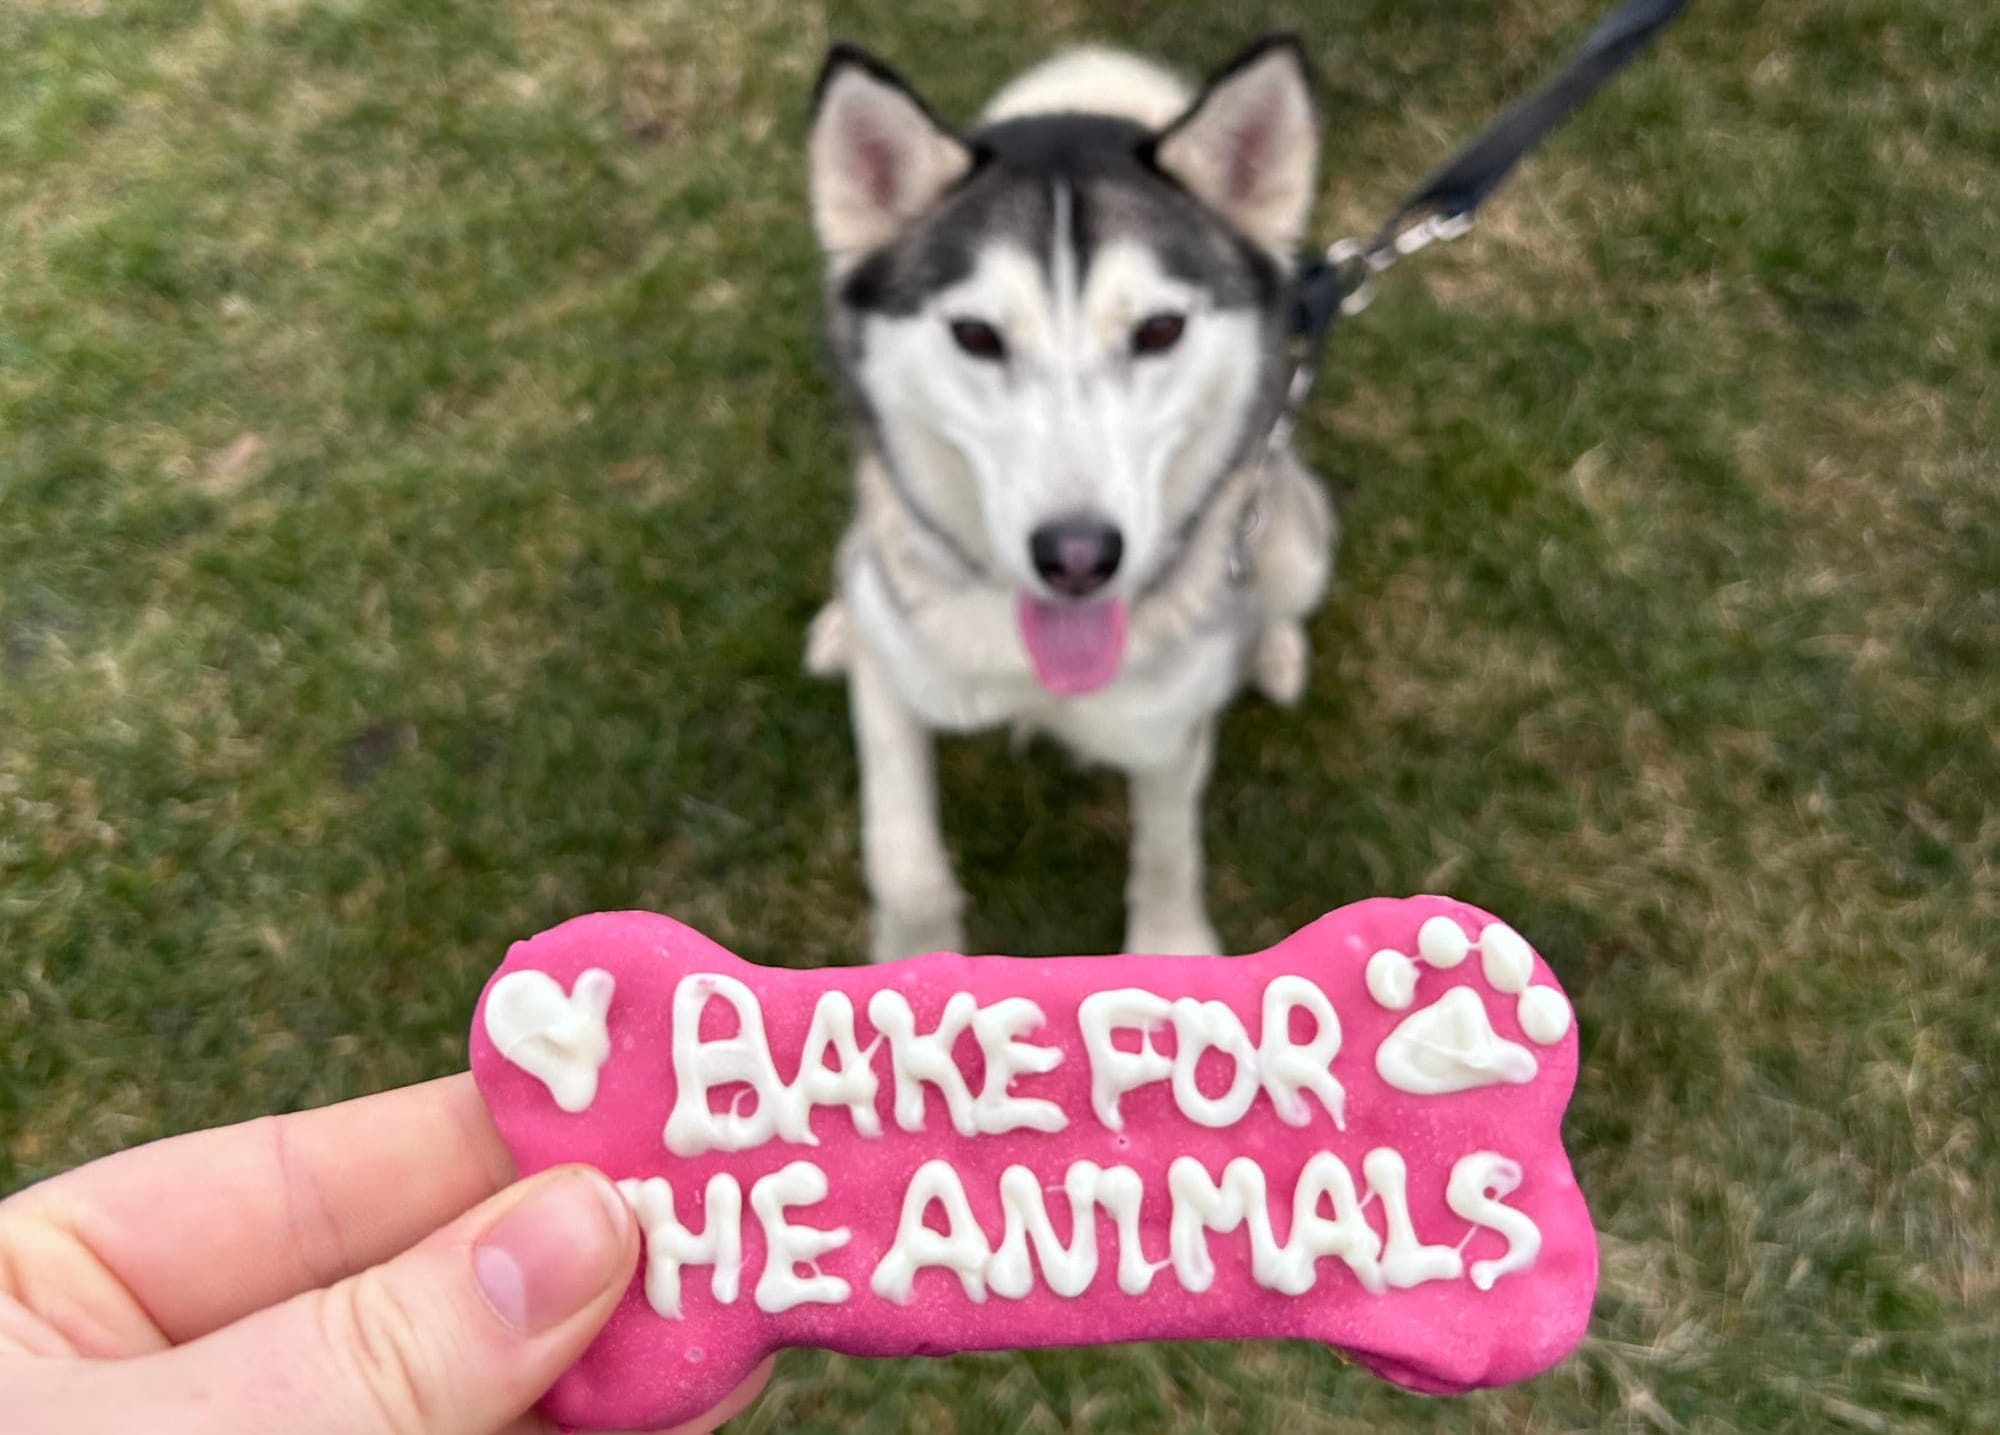                      Baked goodies can be a boon for the Humane Society                             
                     